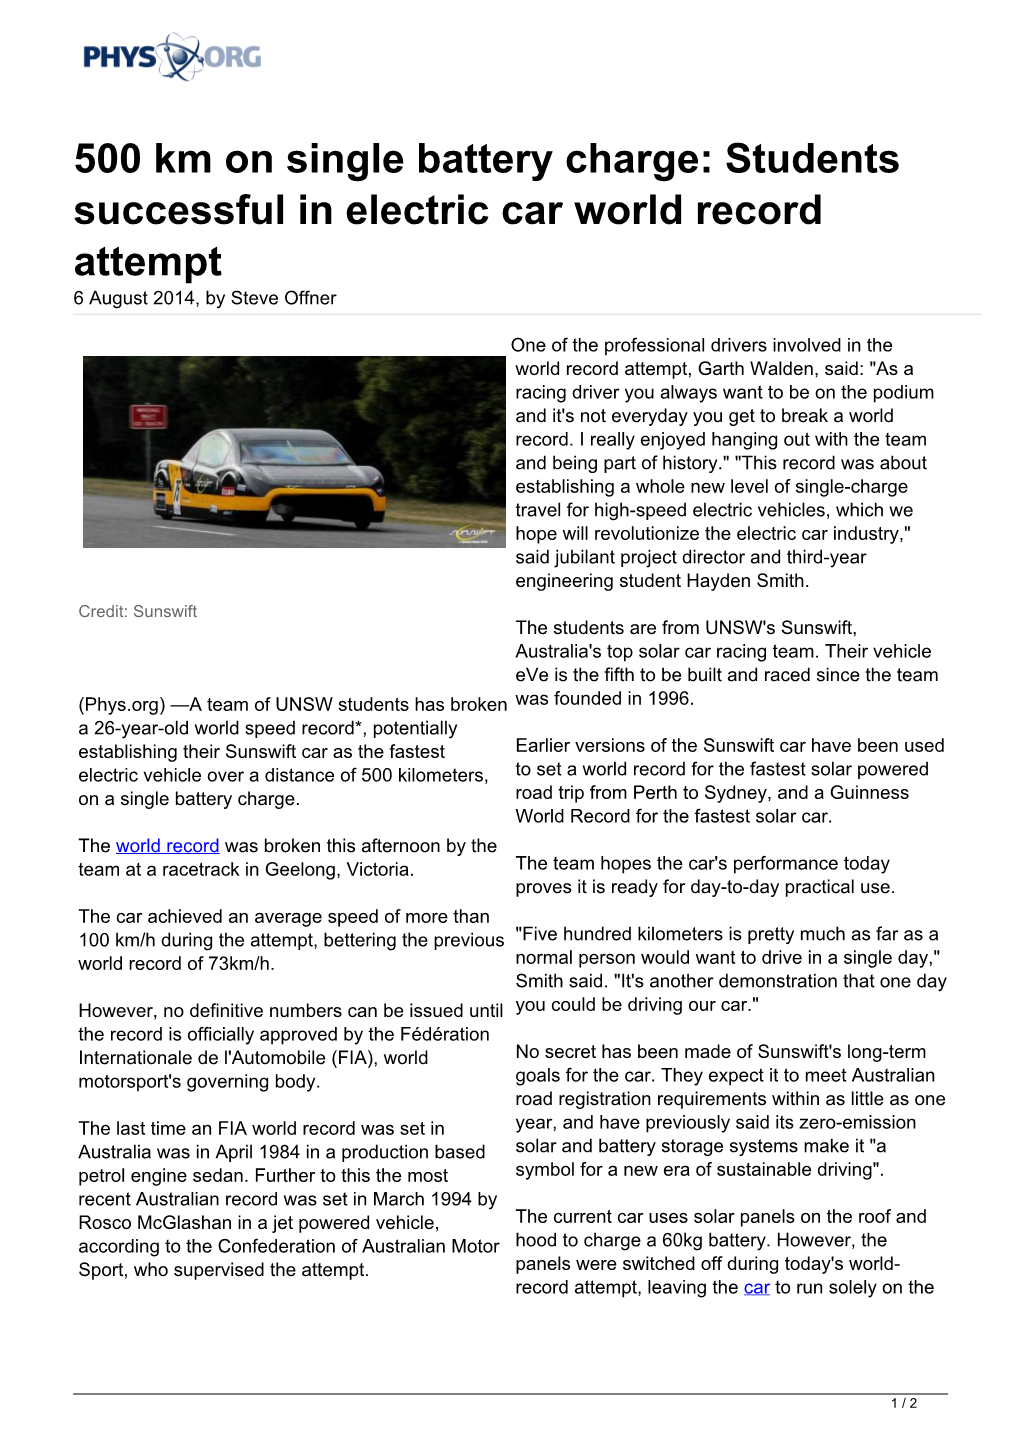 Students Successful in Electric Car World Record Attempt 6 August 2014, by Steve Offner